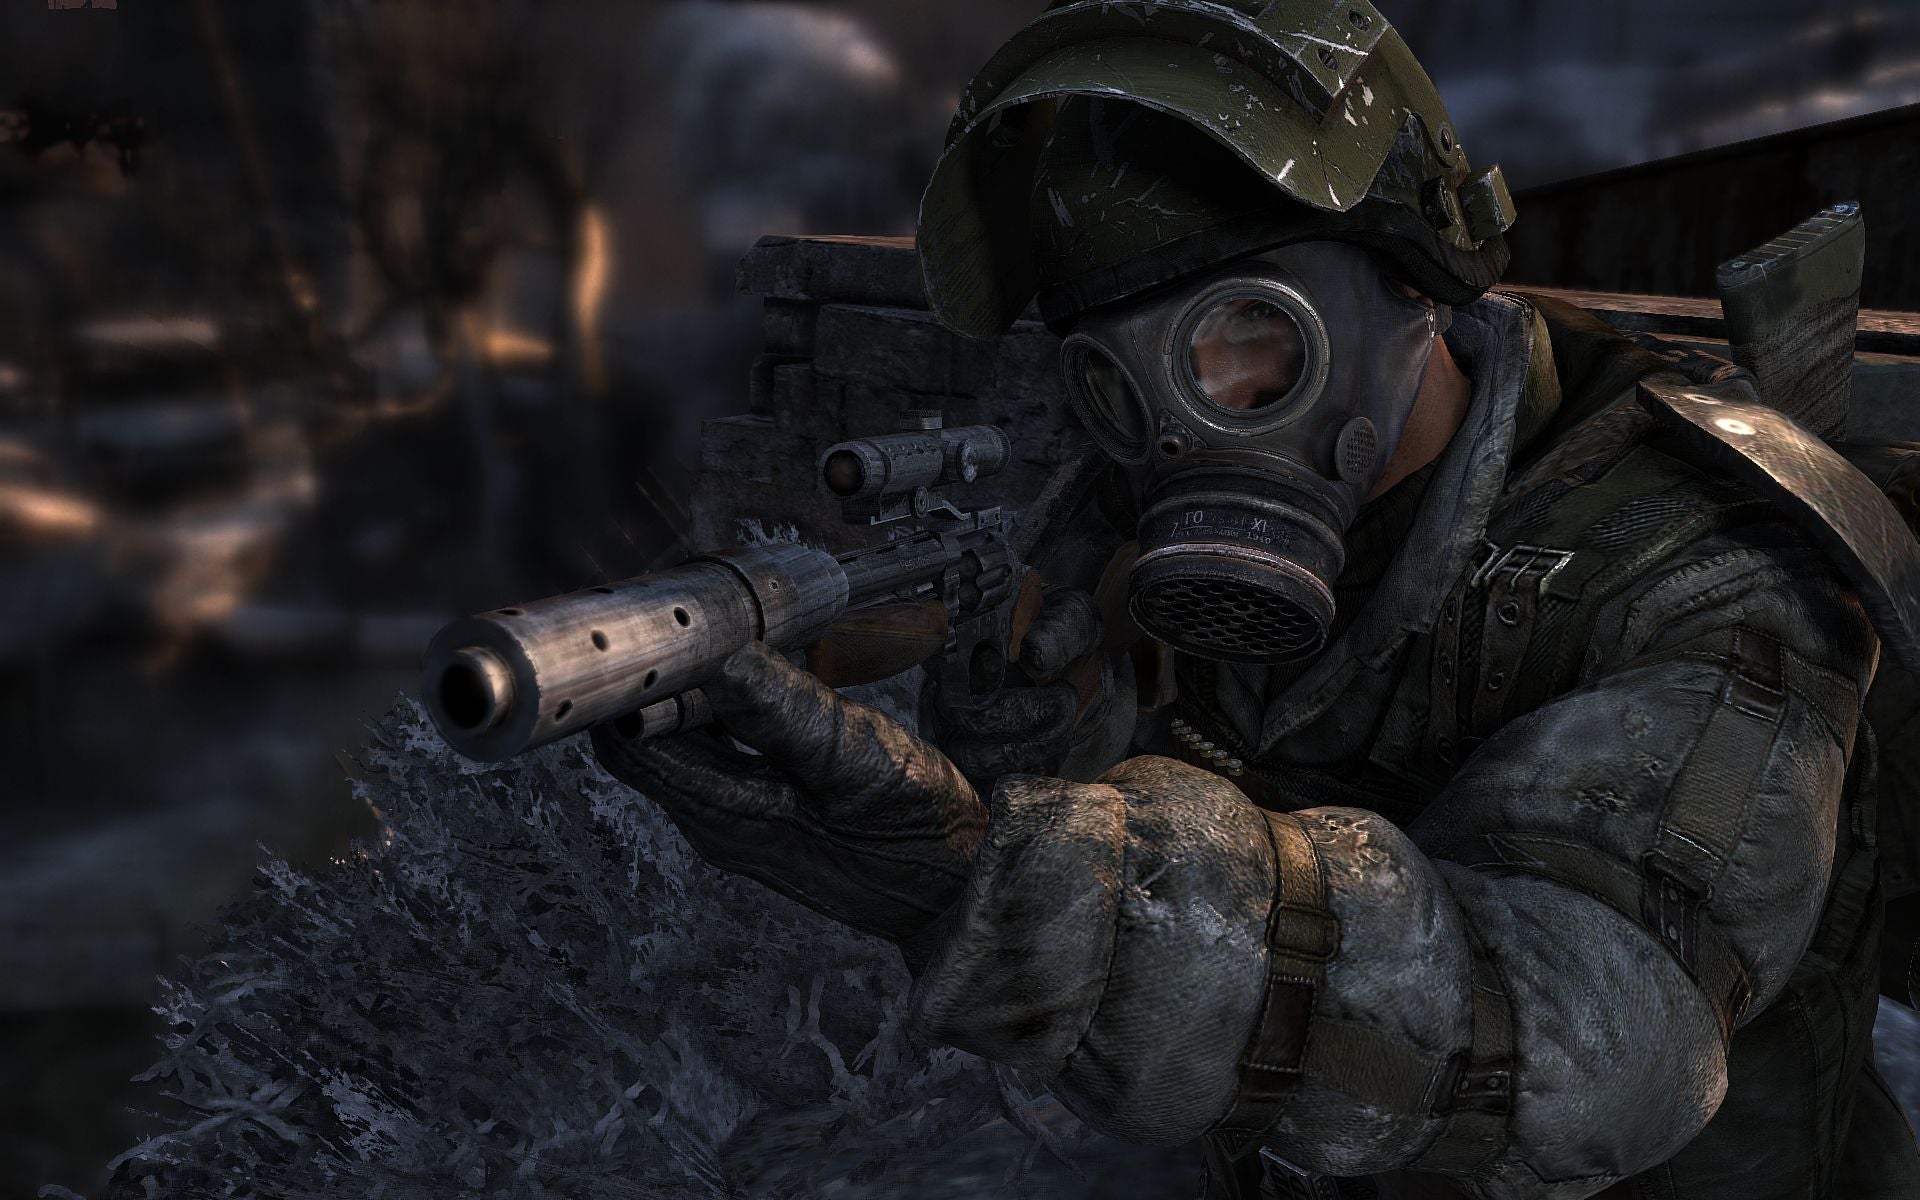 Metro 2033 is free to continue on Steam now, and the rest of the series is on sale